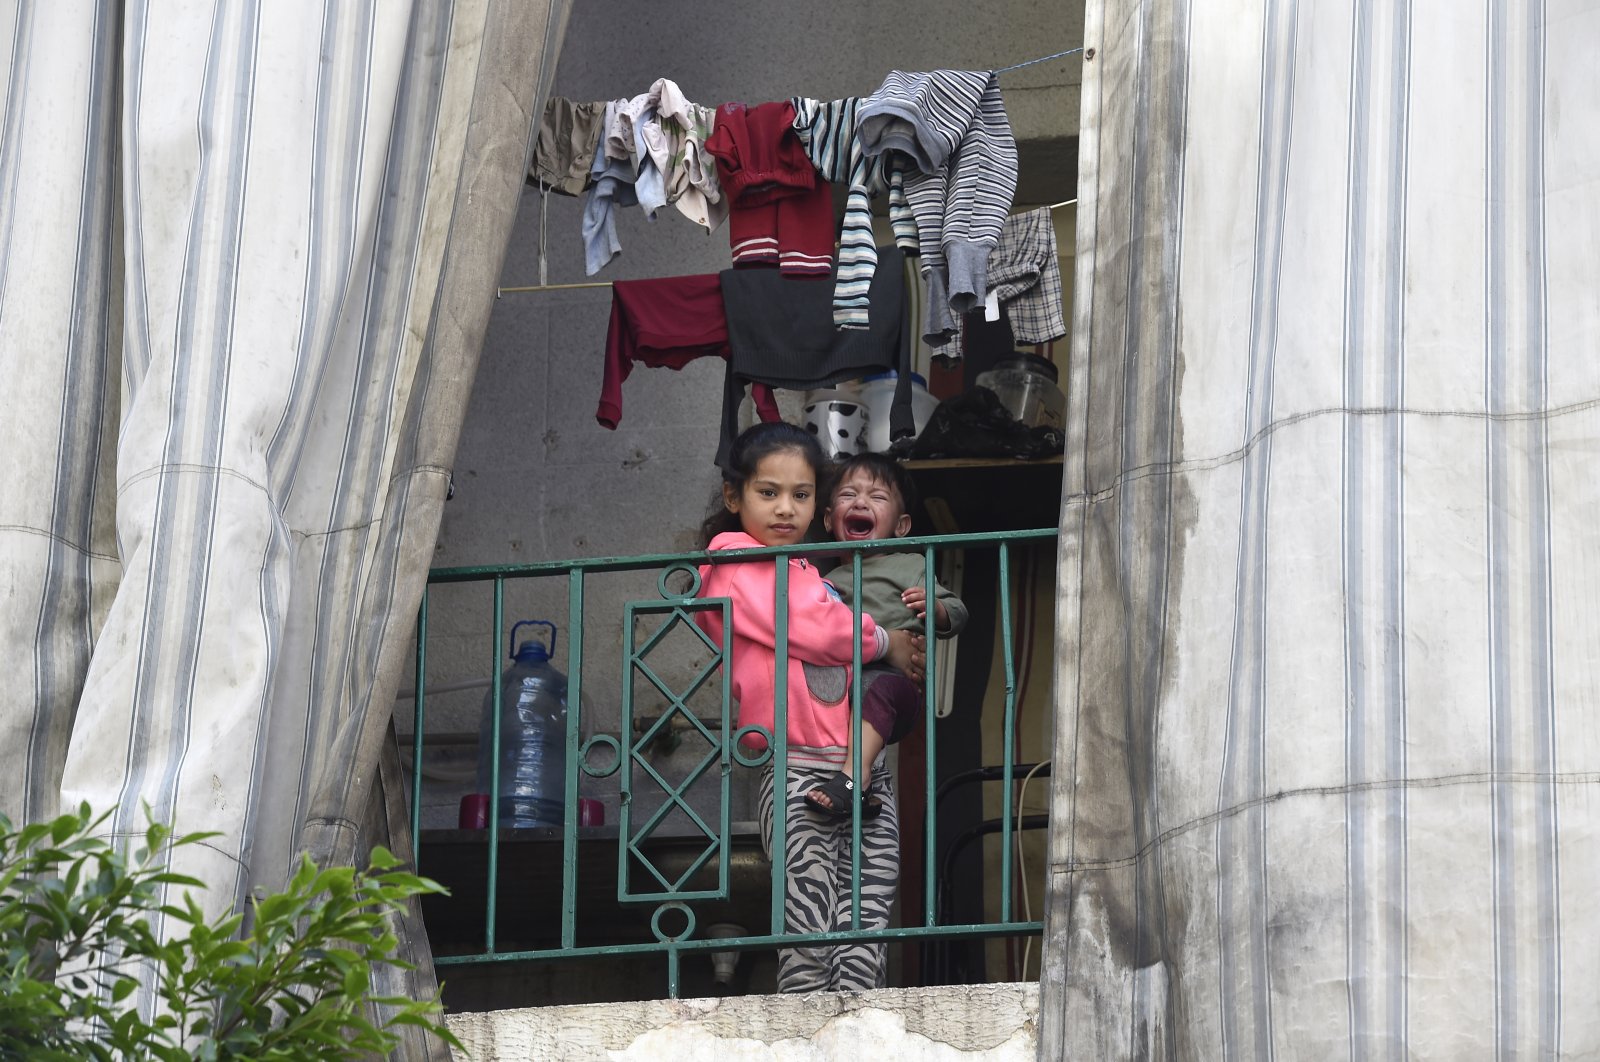 A Syrian refugee girl holds her crying younger brother as she looks on from a balcony in a residential building where Syrian refugees who have tested positive for the novel coronavirus remain quarantined in Beirut, Lebanon, May 20, 2020. (EPA Photo)